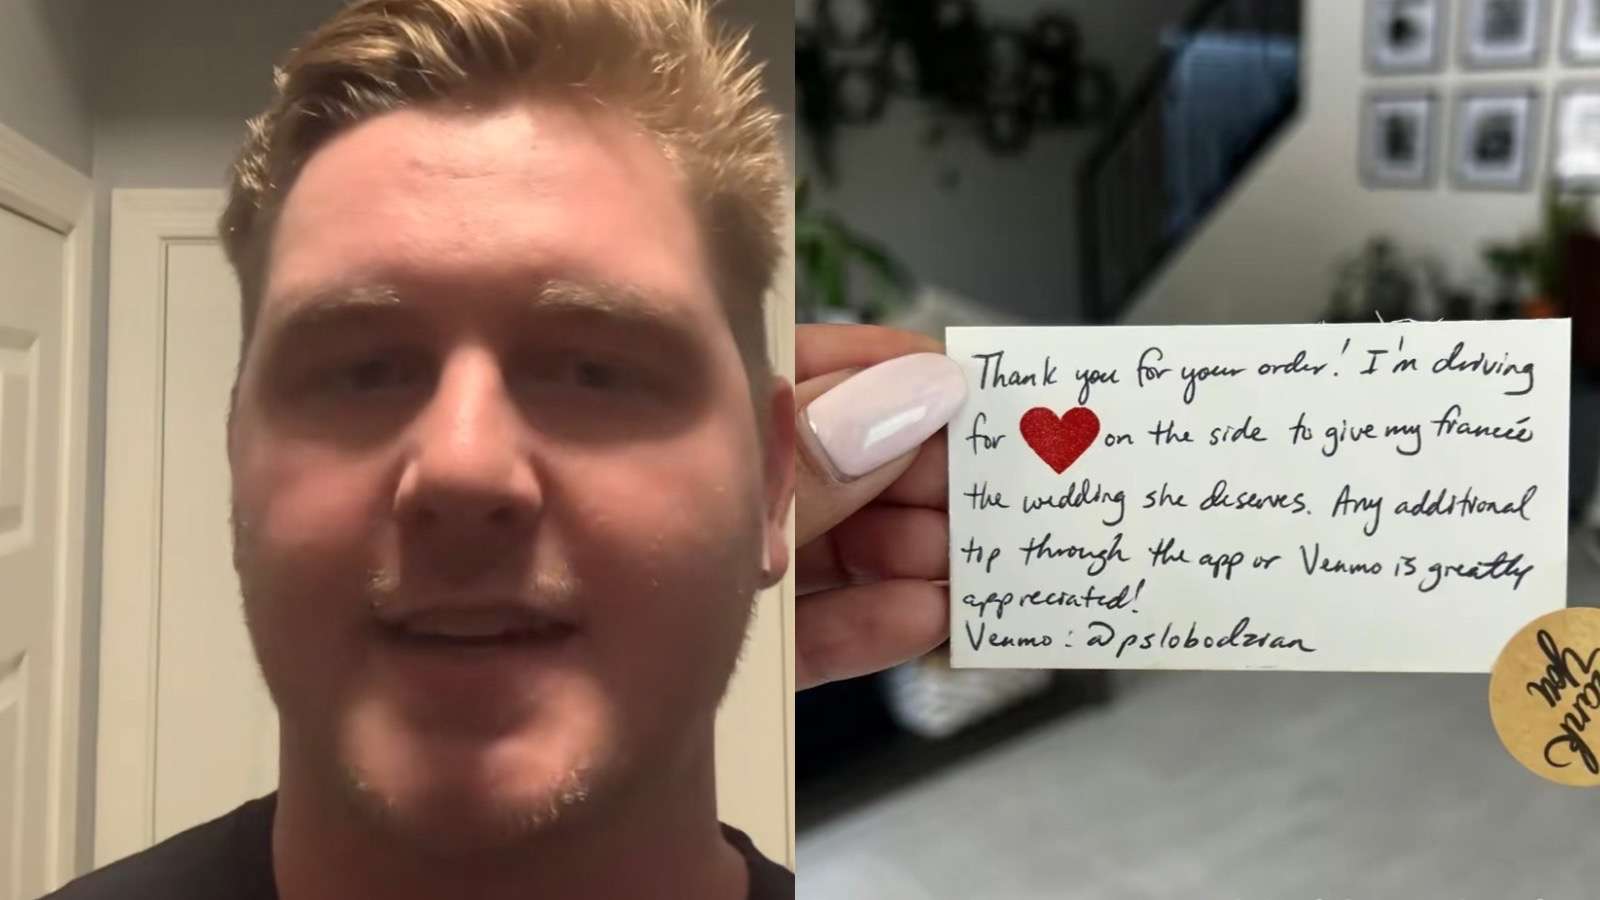 ubereats driver pays off wedding after leaving note with customer